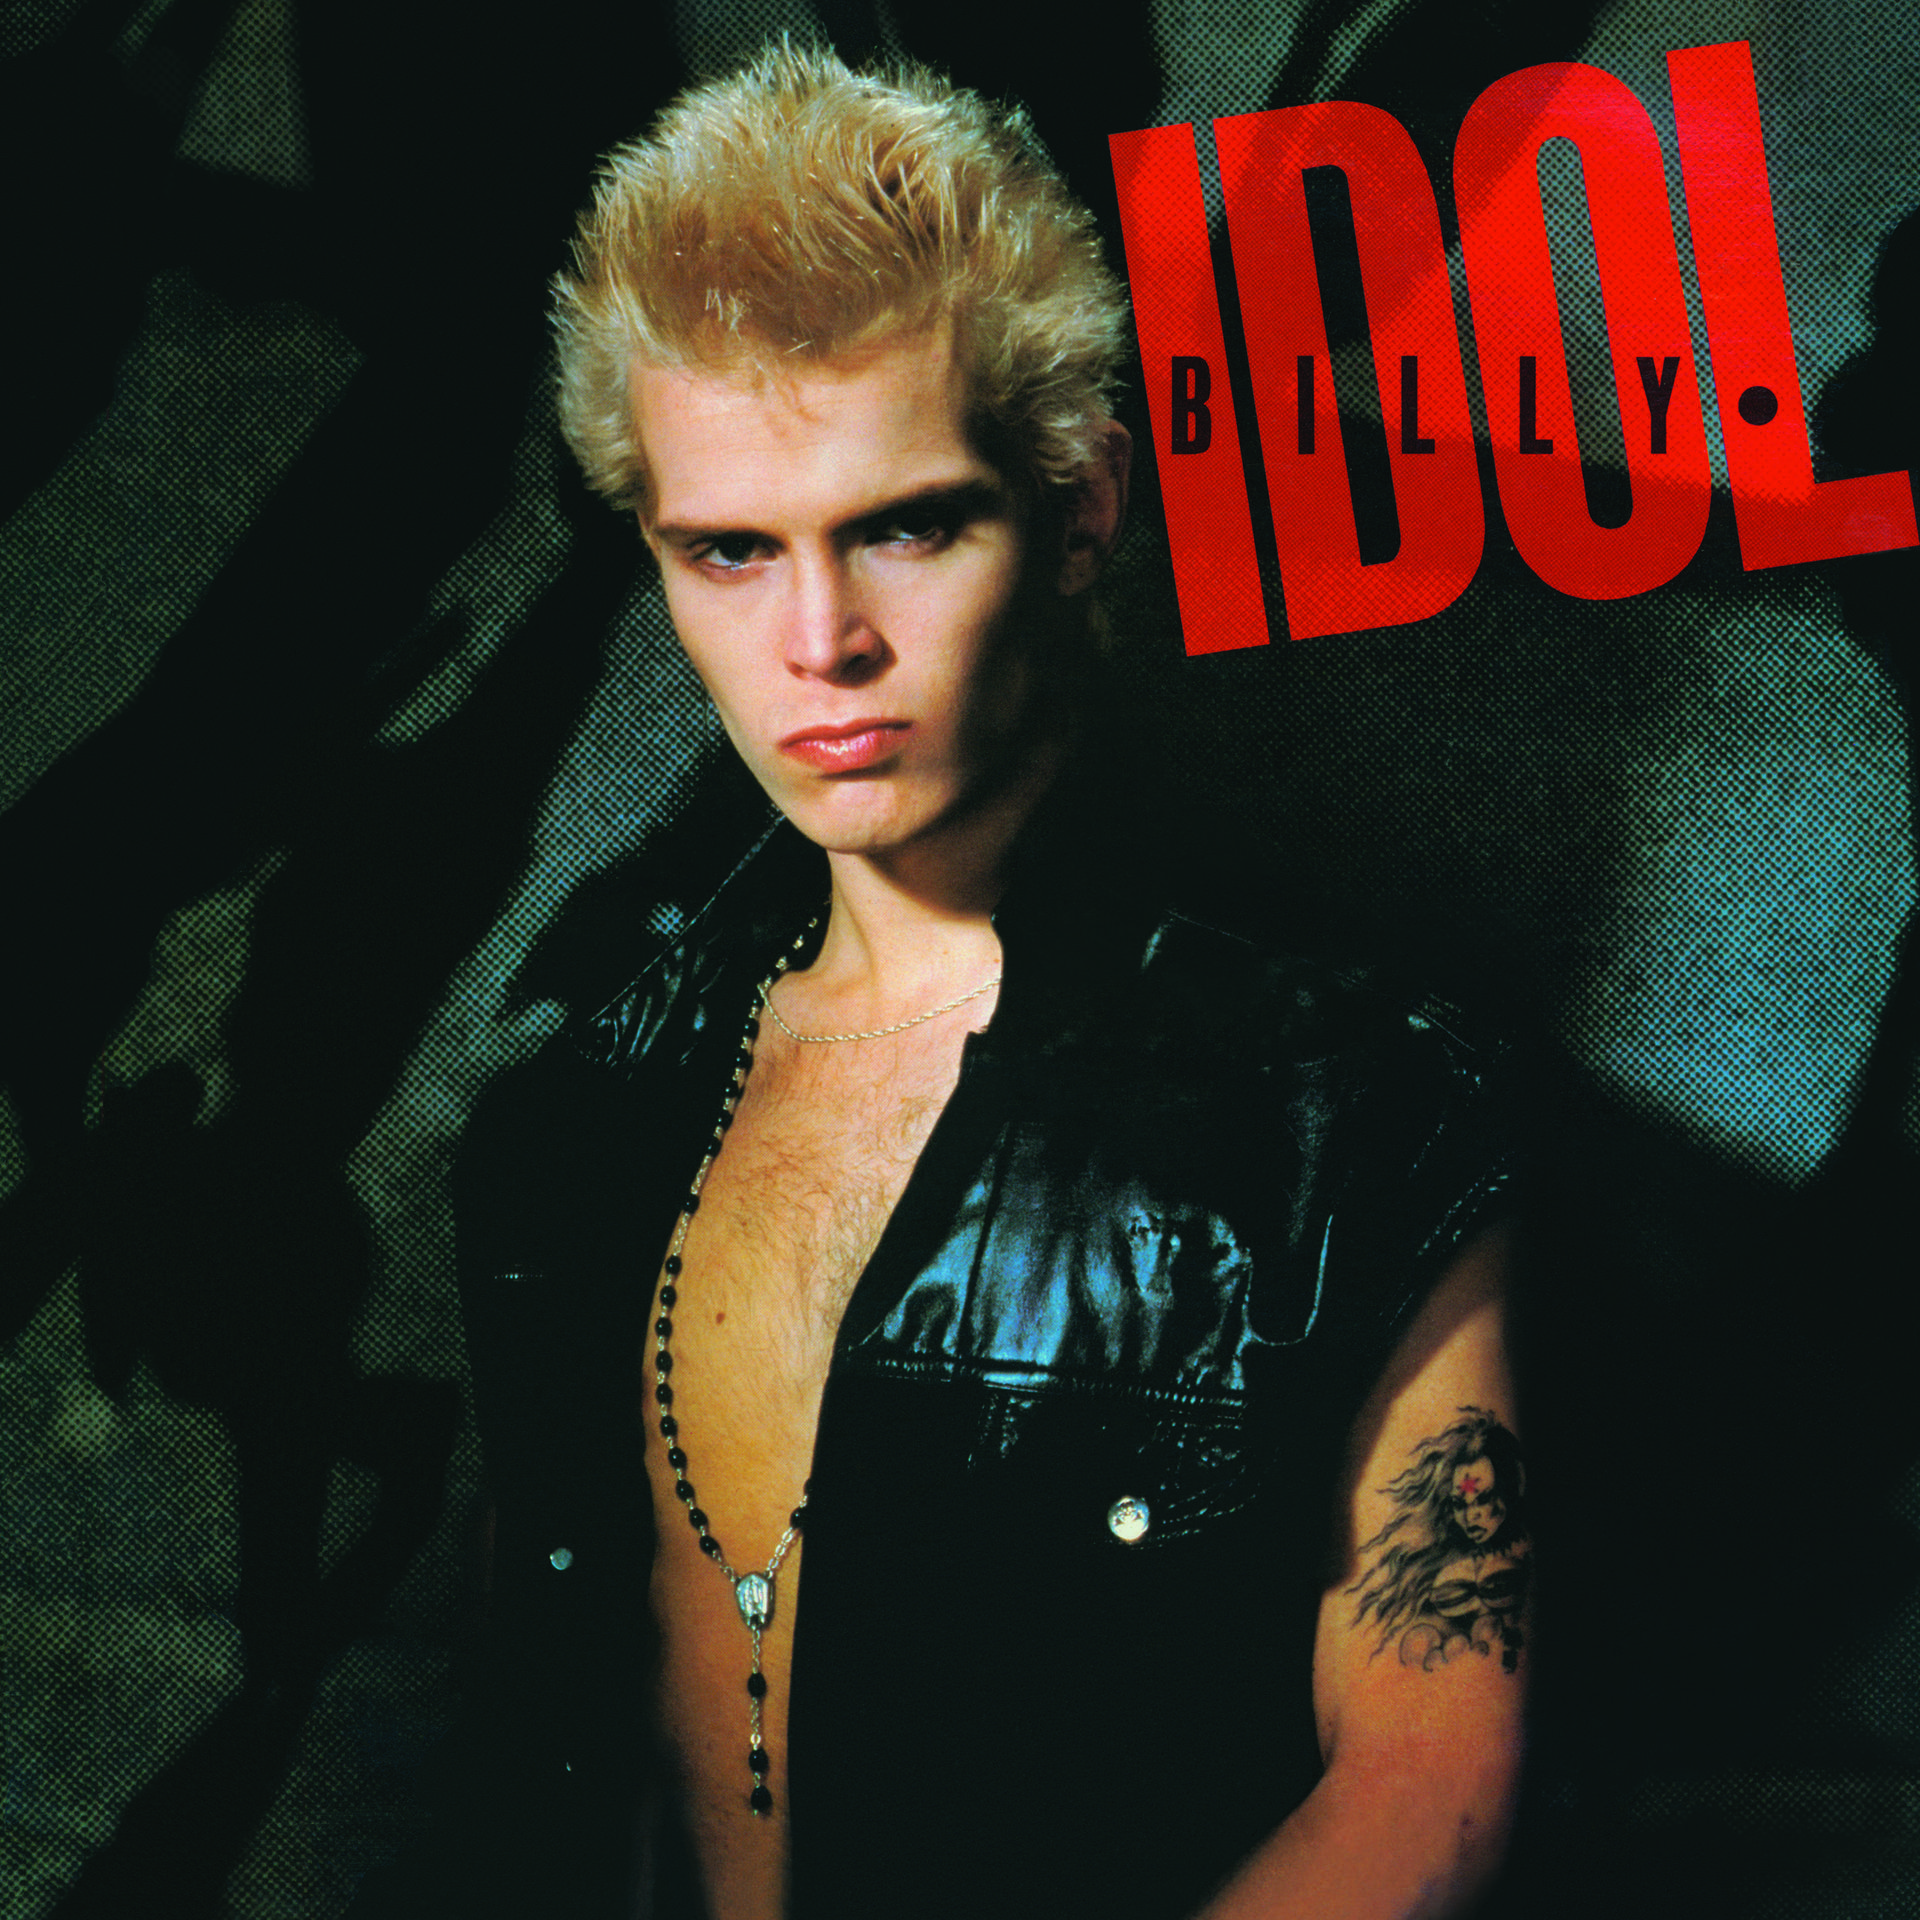 BILLY IDOL’S EXPANDED REISSUE OF SELF-TITLED DEBUT ALBUM OUT NOW VIA CAPITOL/UME